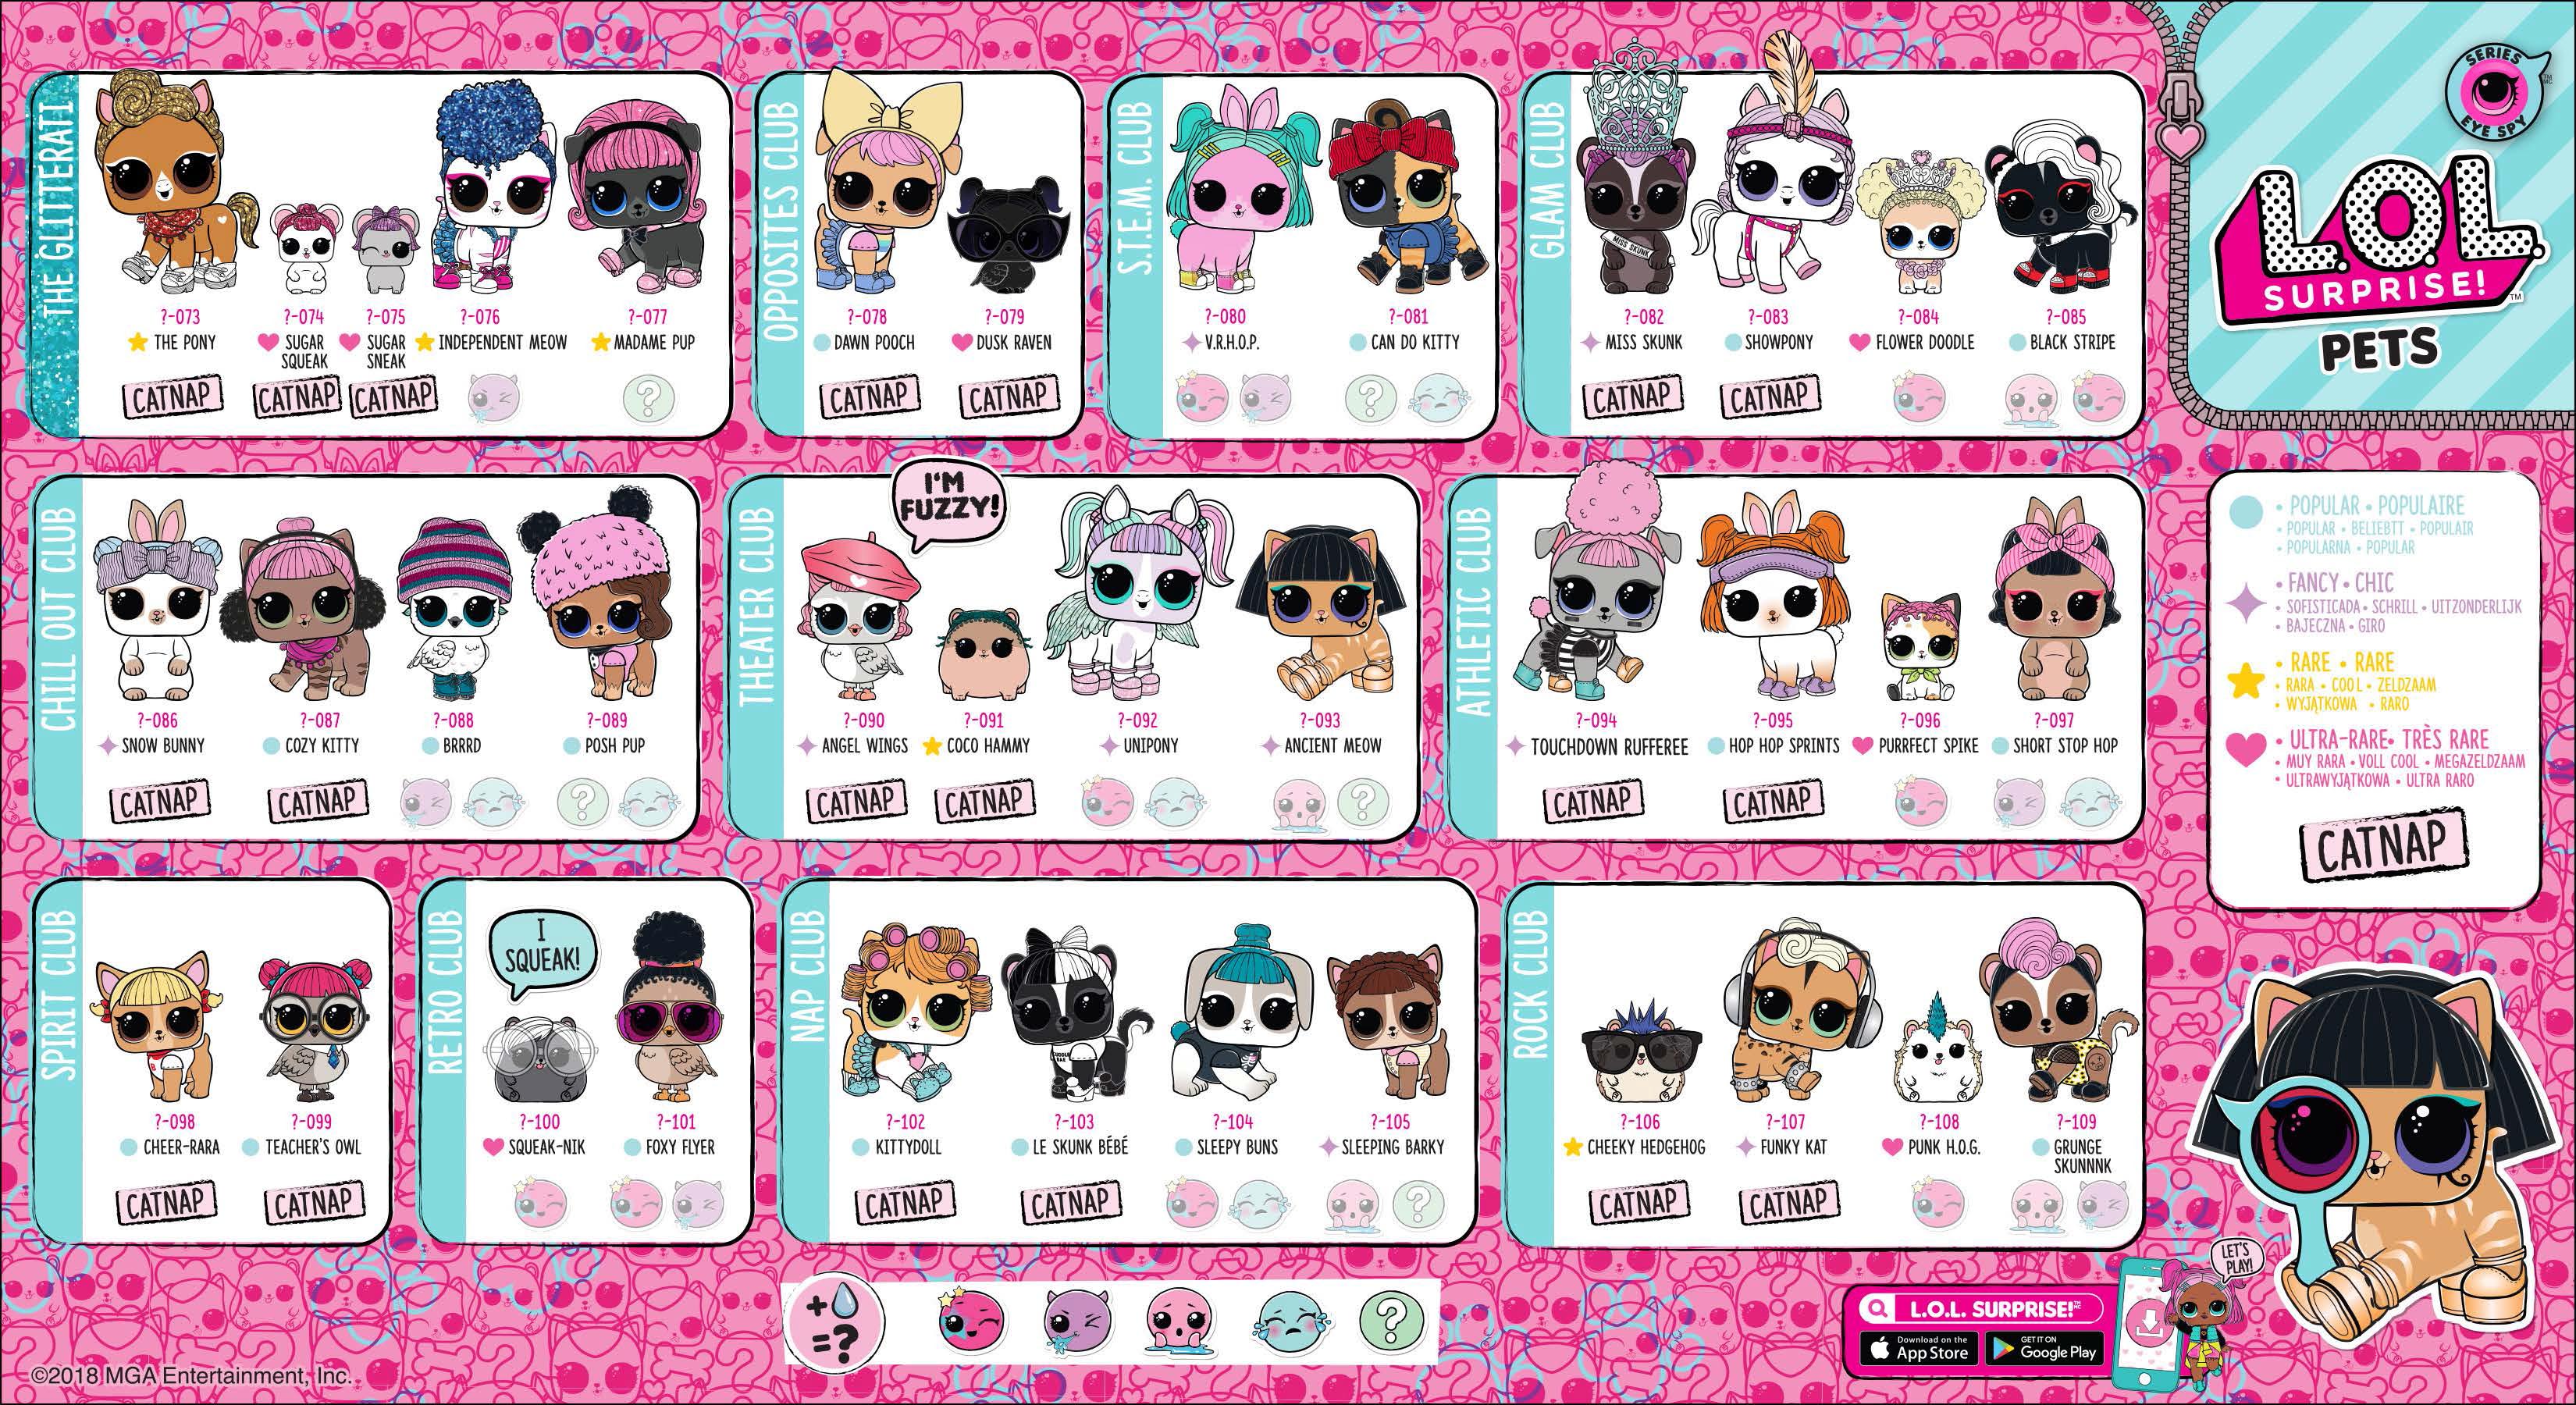 lol dolls collectors guide series 1